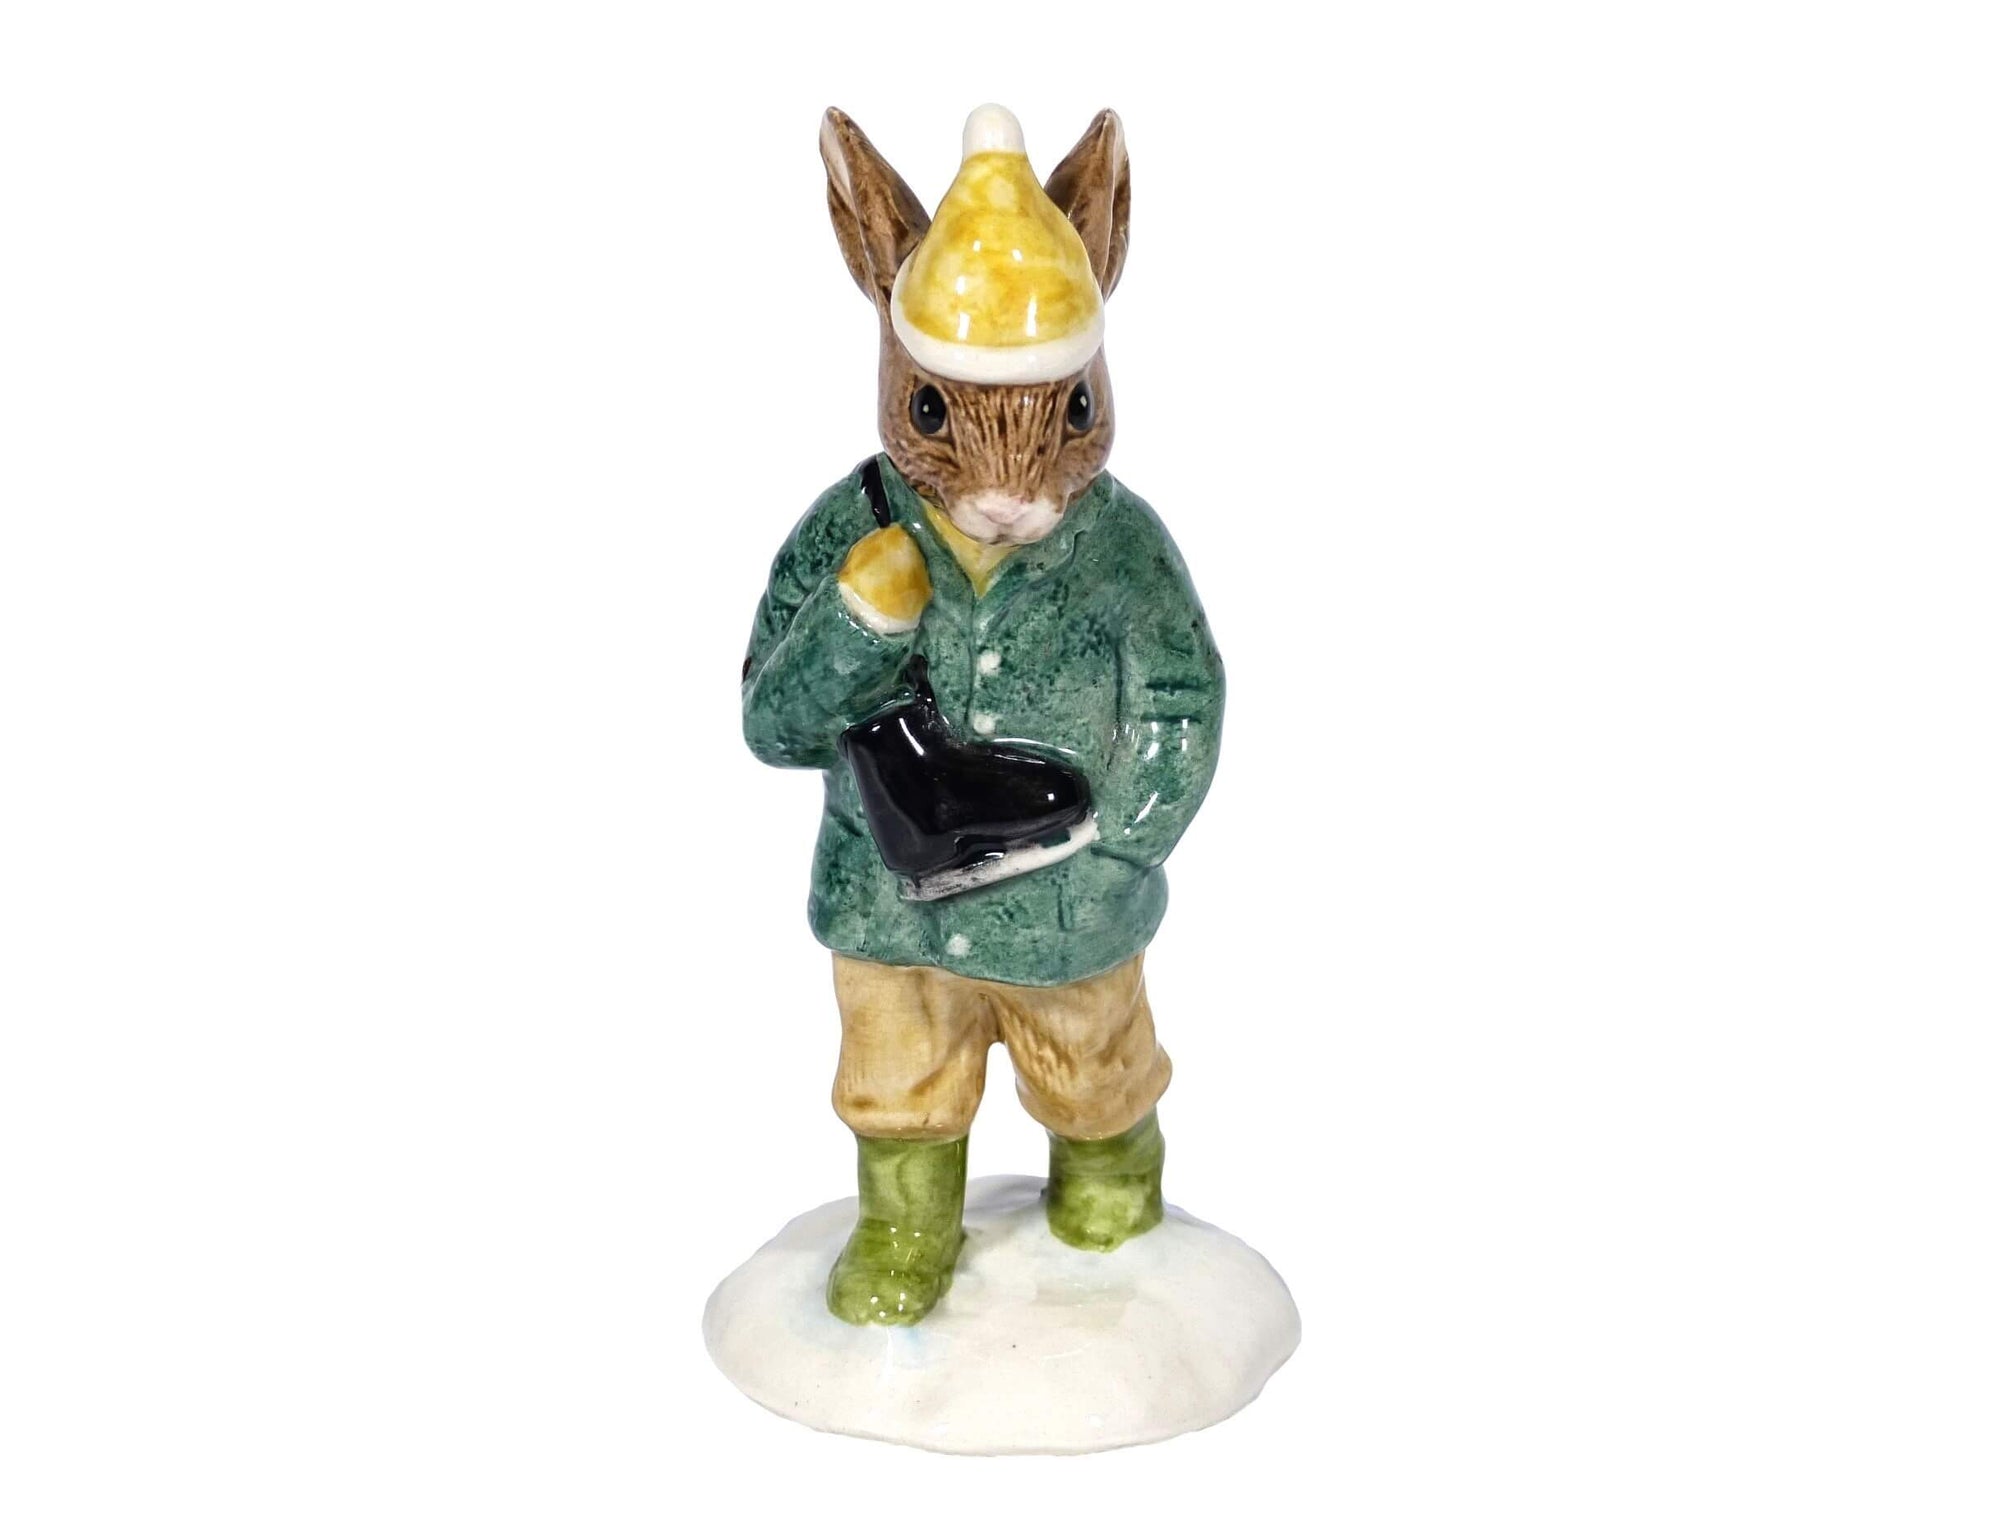 The bunny is wearing a green coat, a yellow hat with a white pompom and green boots. His black skates are hanging over his shoulder.